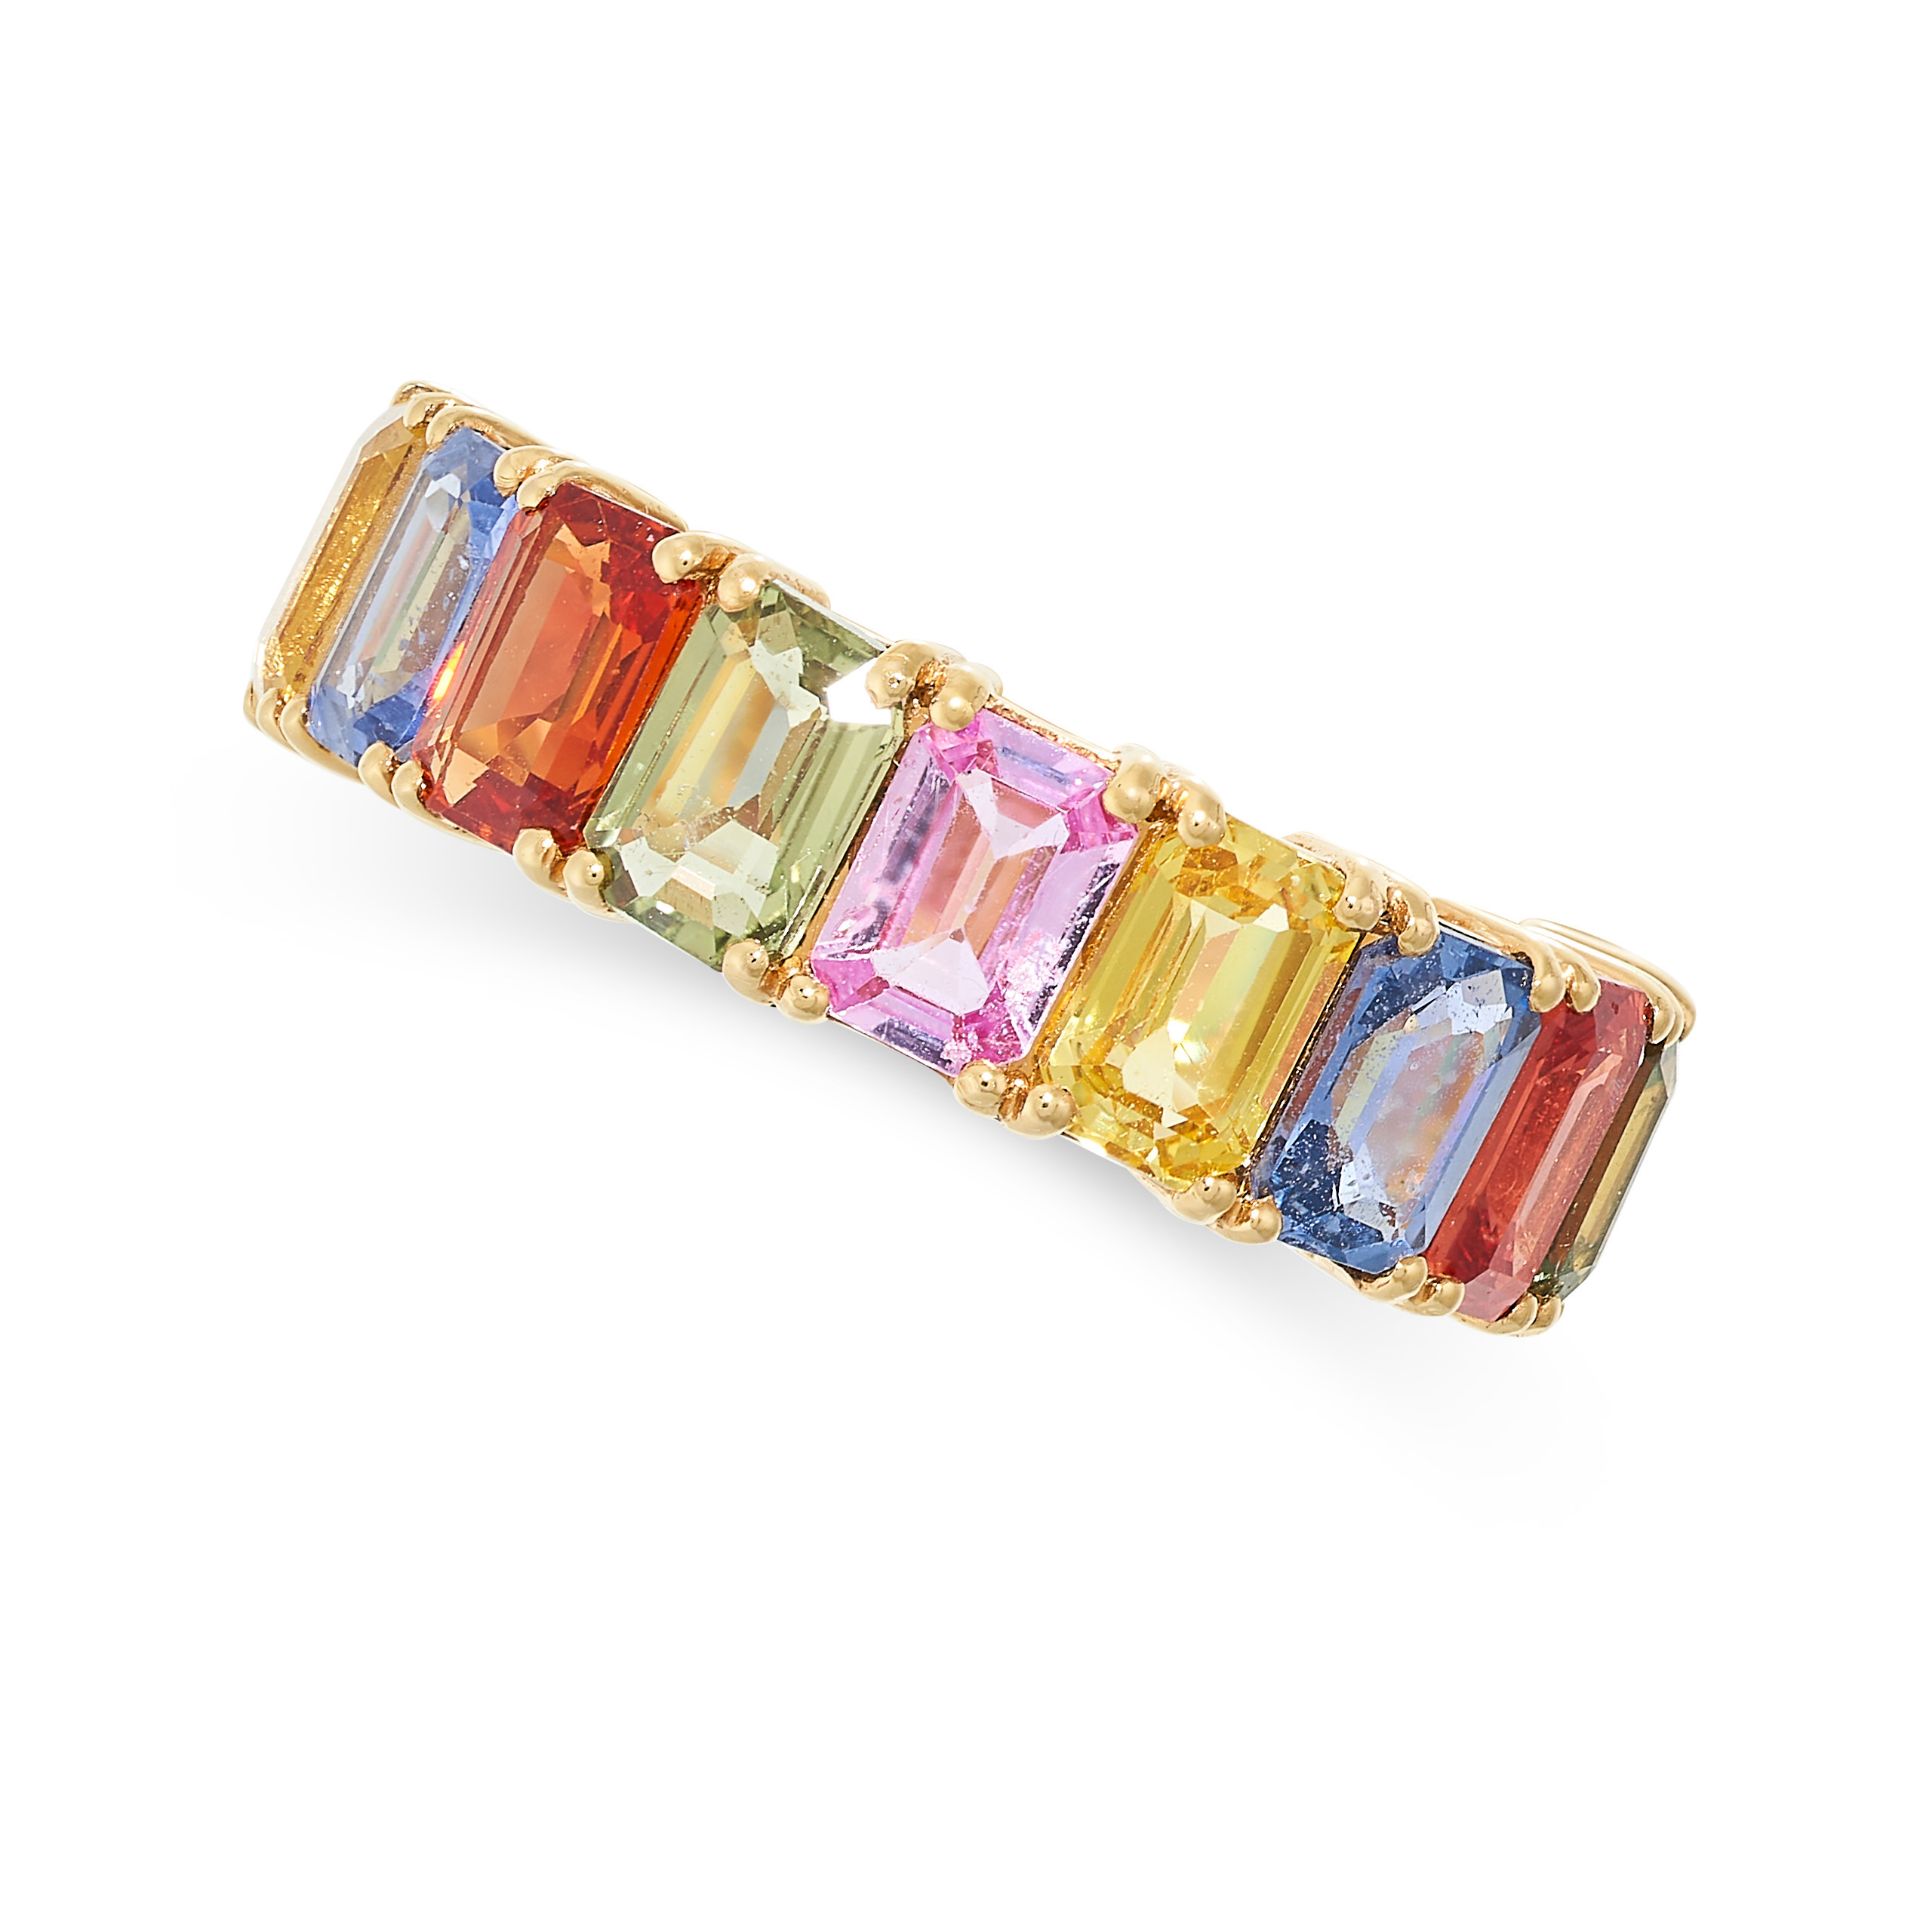 A MULTICOLOUR SAPPHIRE ETERNITY RING in 18ct yellow gold, set all round with a row of emerald cut